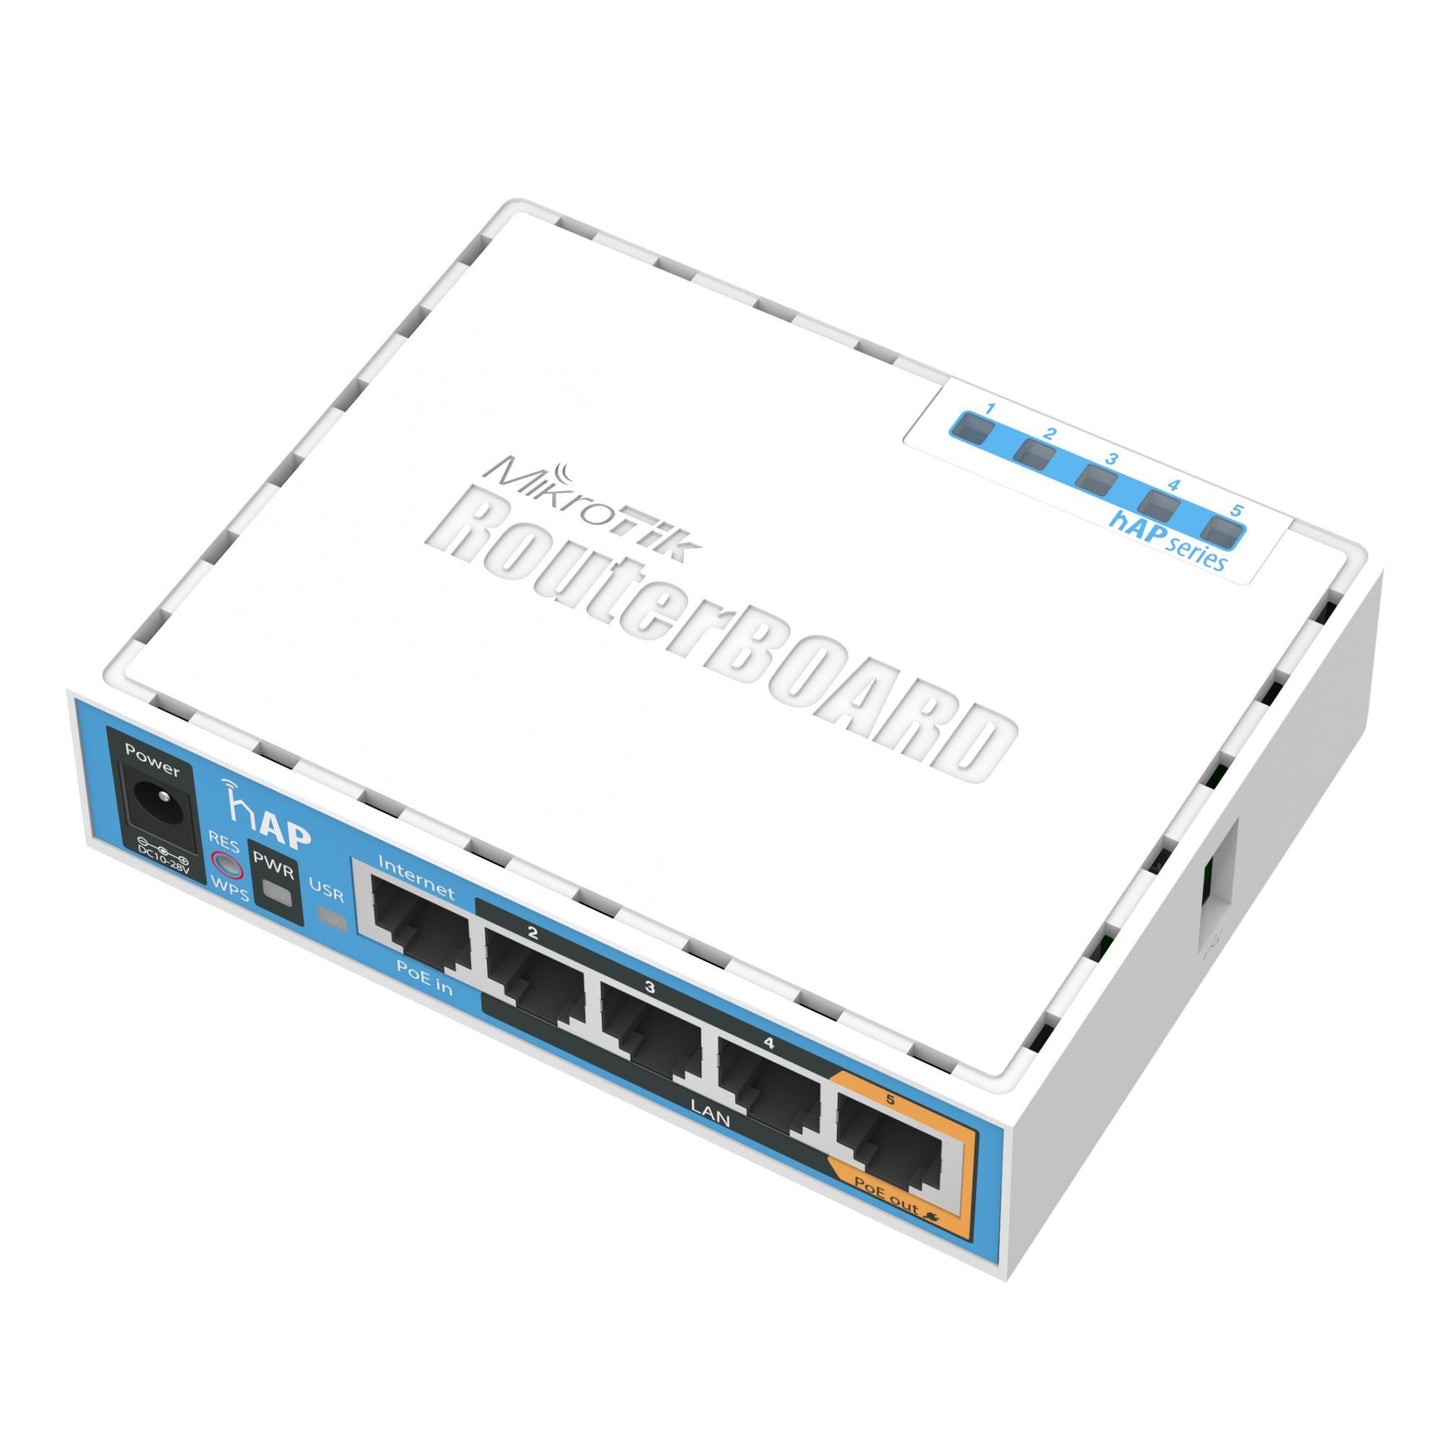 MikroTik RouterBOARD (hAP) WiFi 4 Access Point - RB951UI-2ND